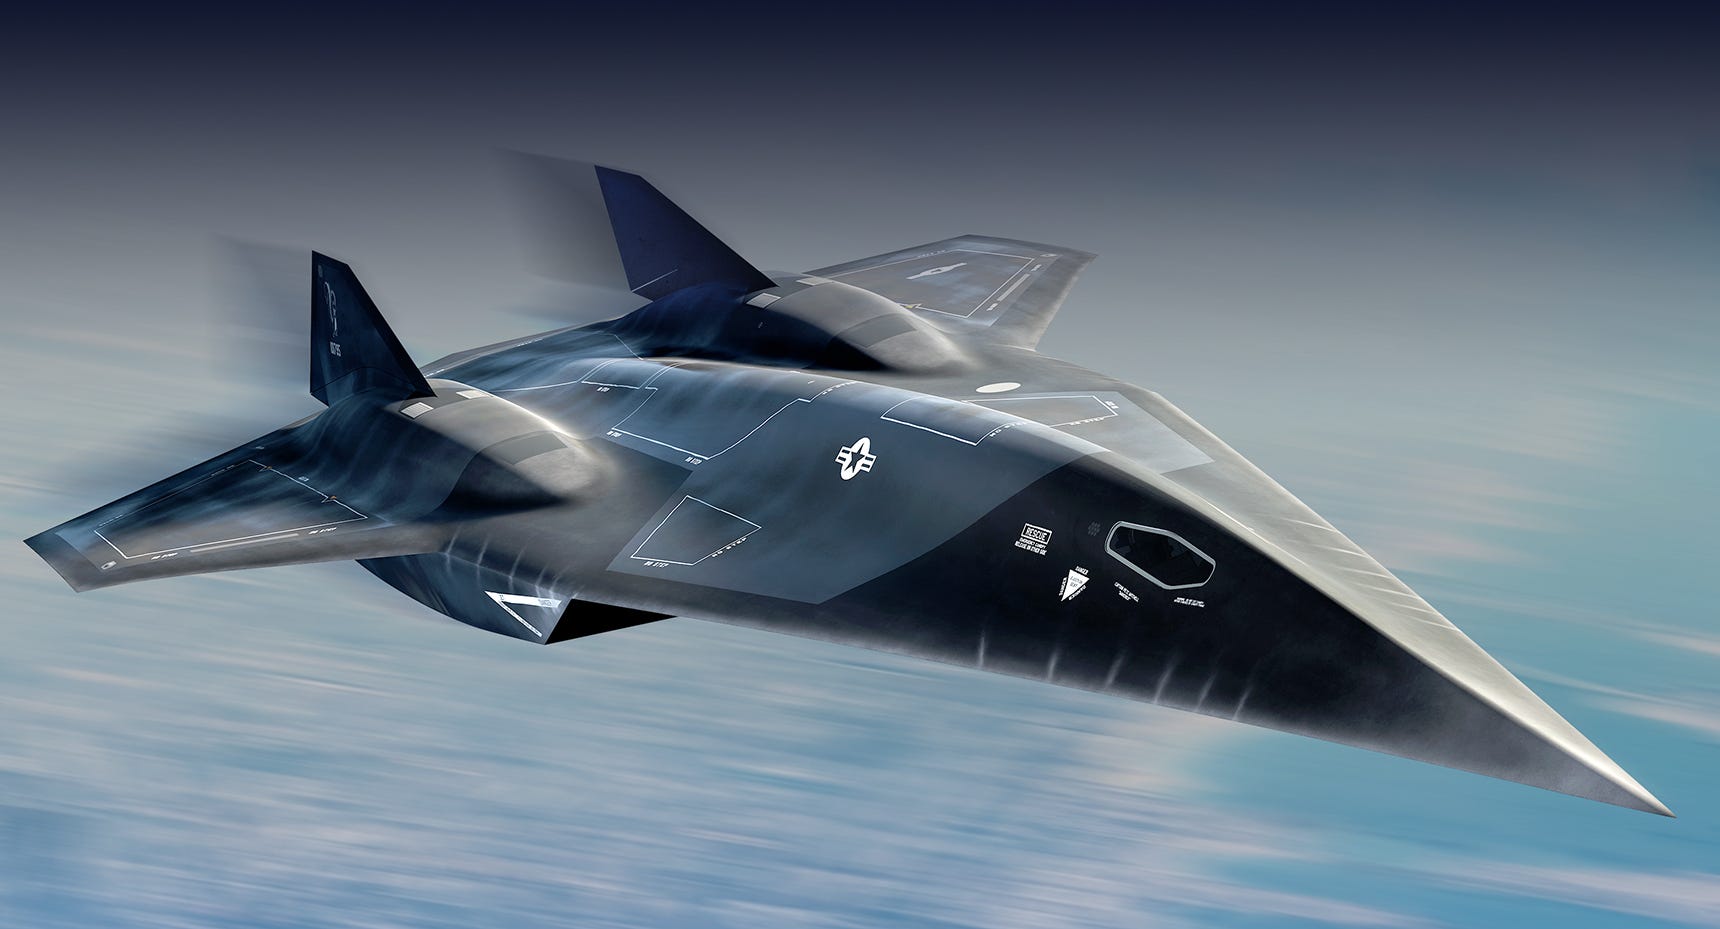 Darkstar, the Hypersonic Jet in 'Top Gun: Maverick,' Could Become a Real Plane